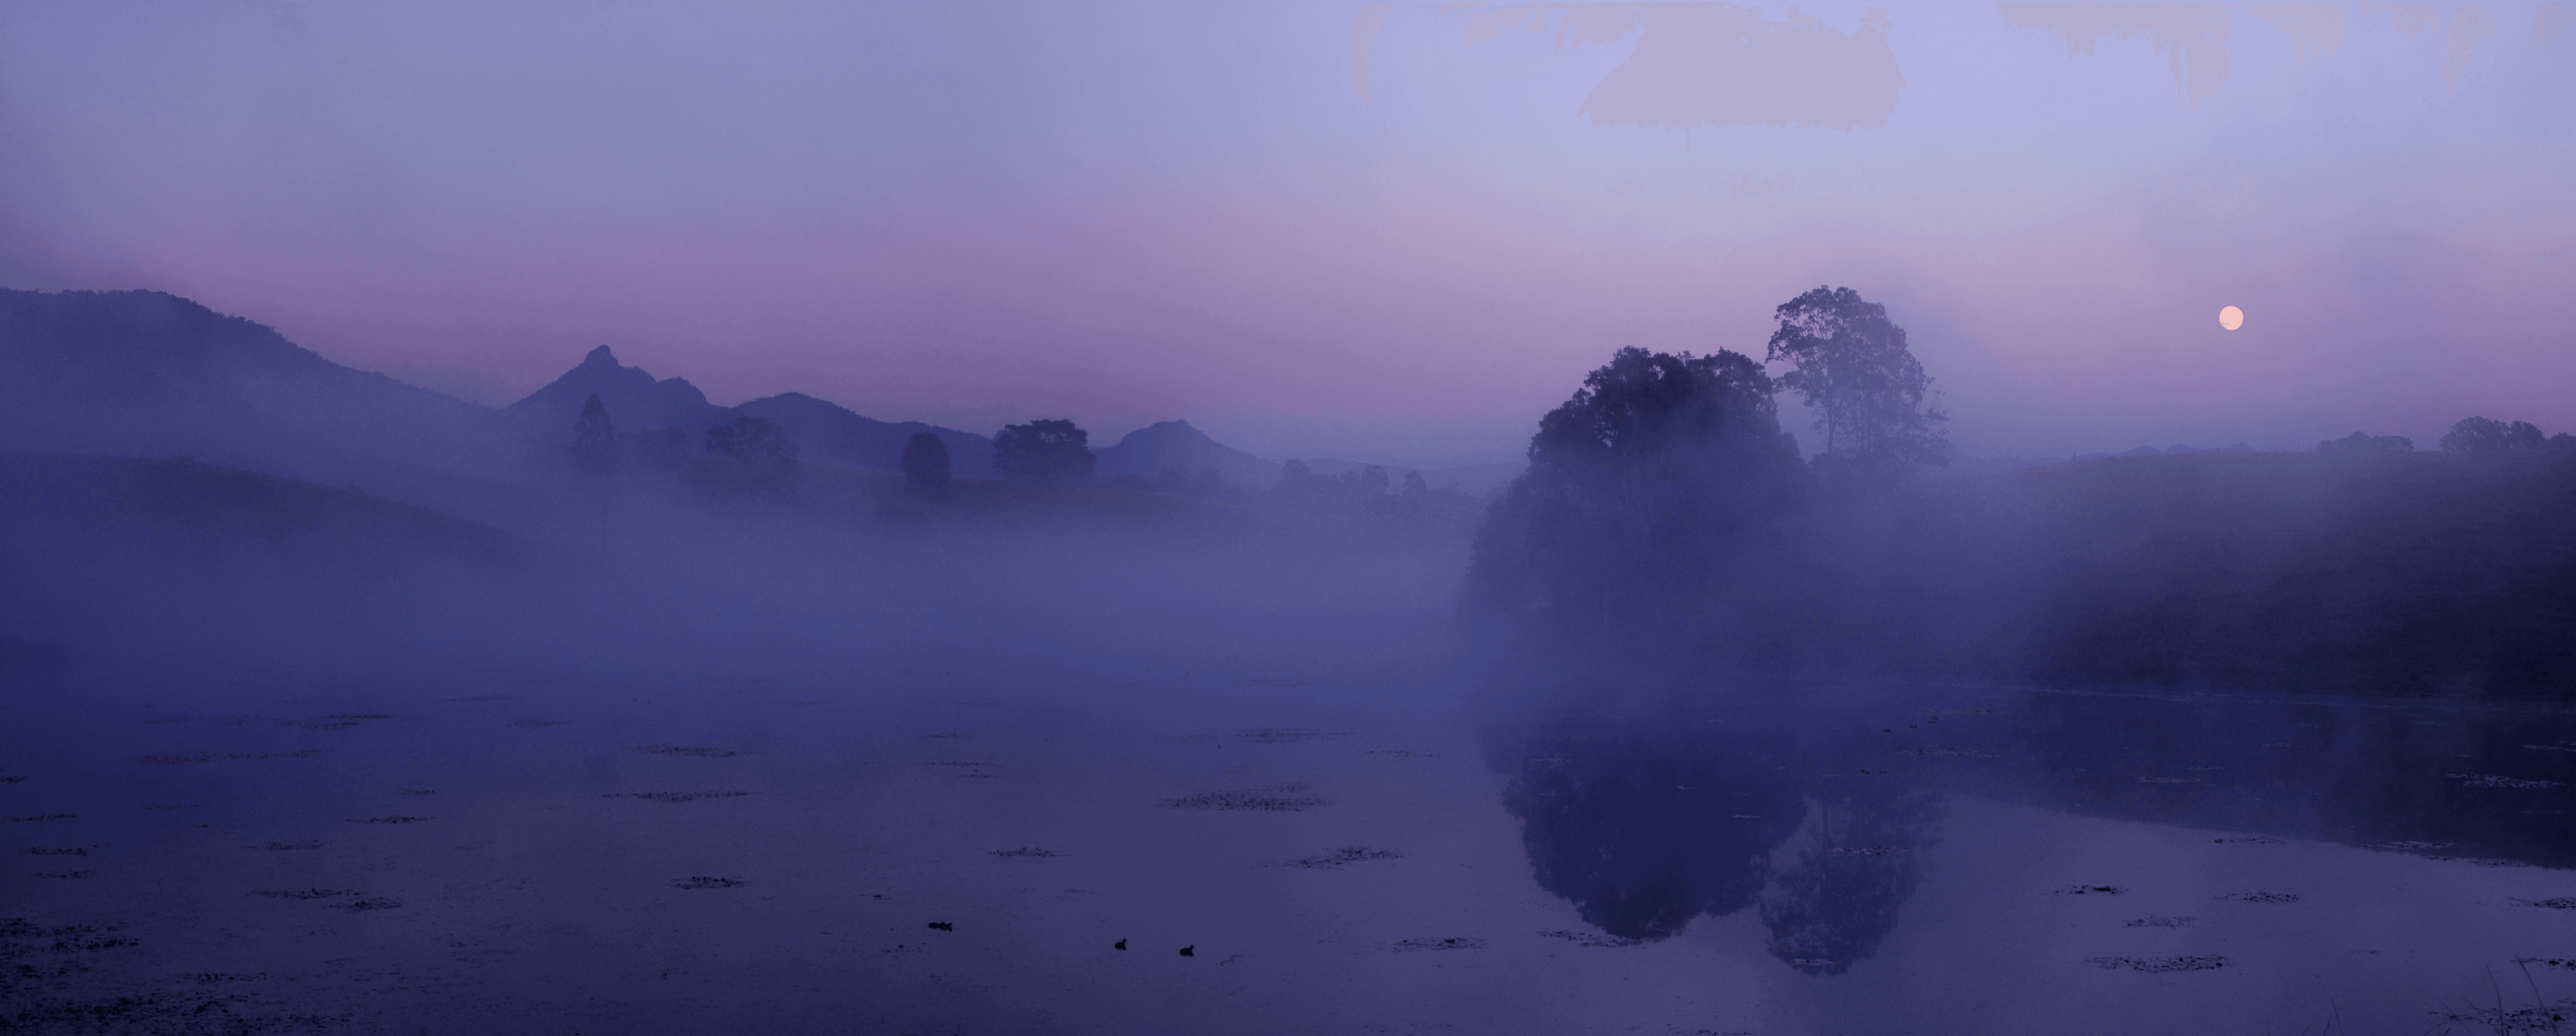 Panoramic photography - Mt Warning - Moon Rise - into the mist